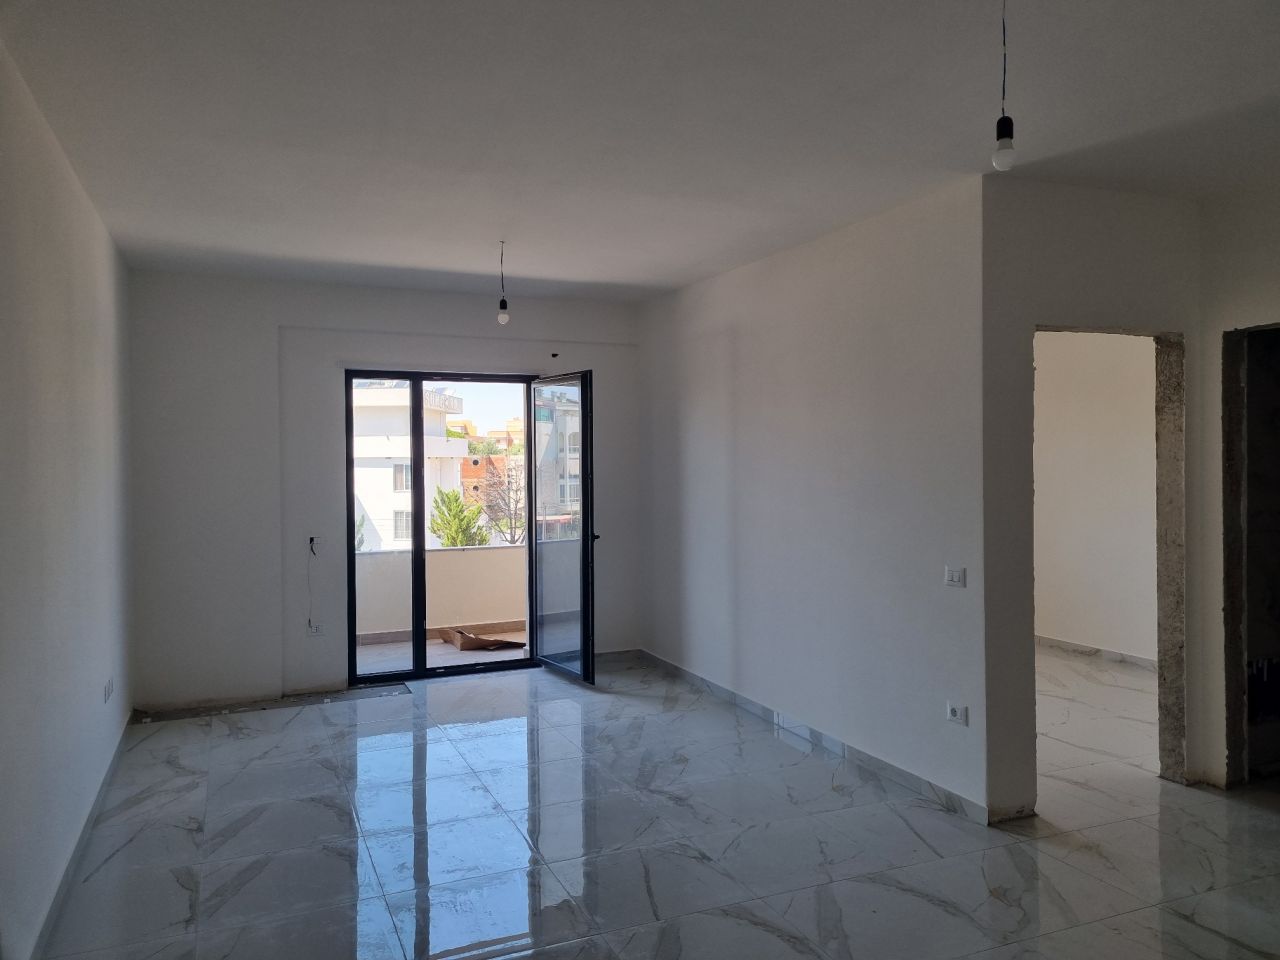  Apartment  For Sale In Mali Robit Golem Durres Albania, Located In A Quiet Area, Close To The Beach